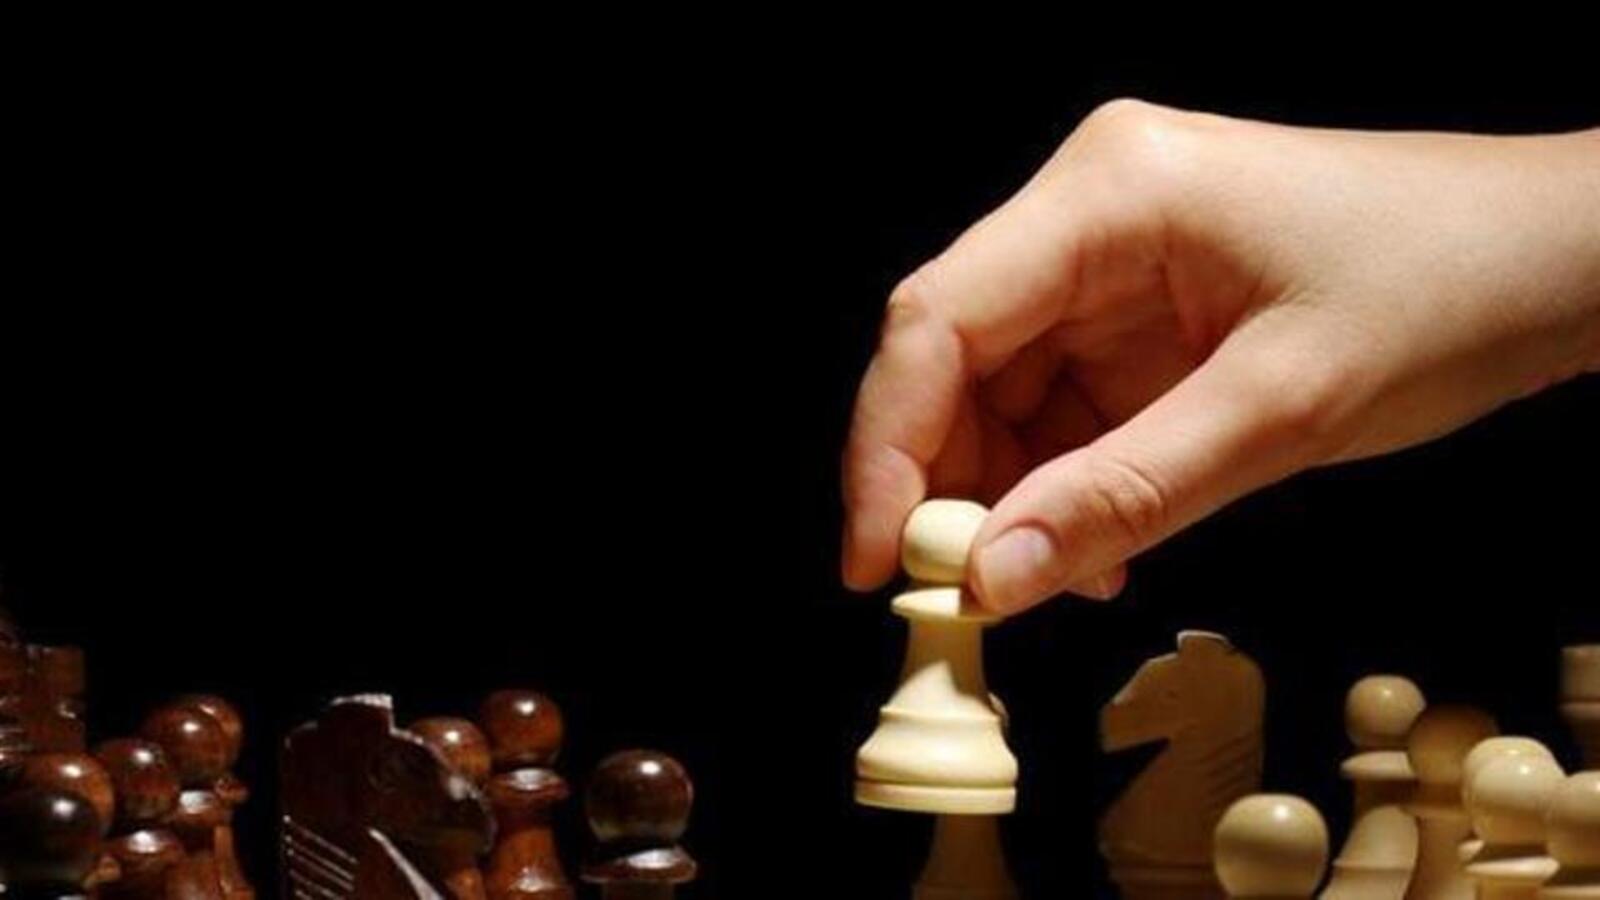 India to host Chess Olympiad in Chennai as FIDE pulls out of